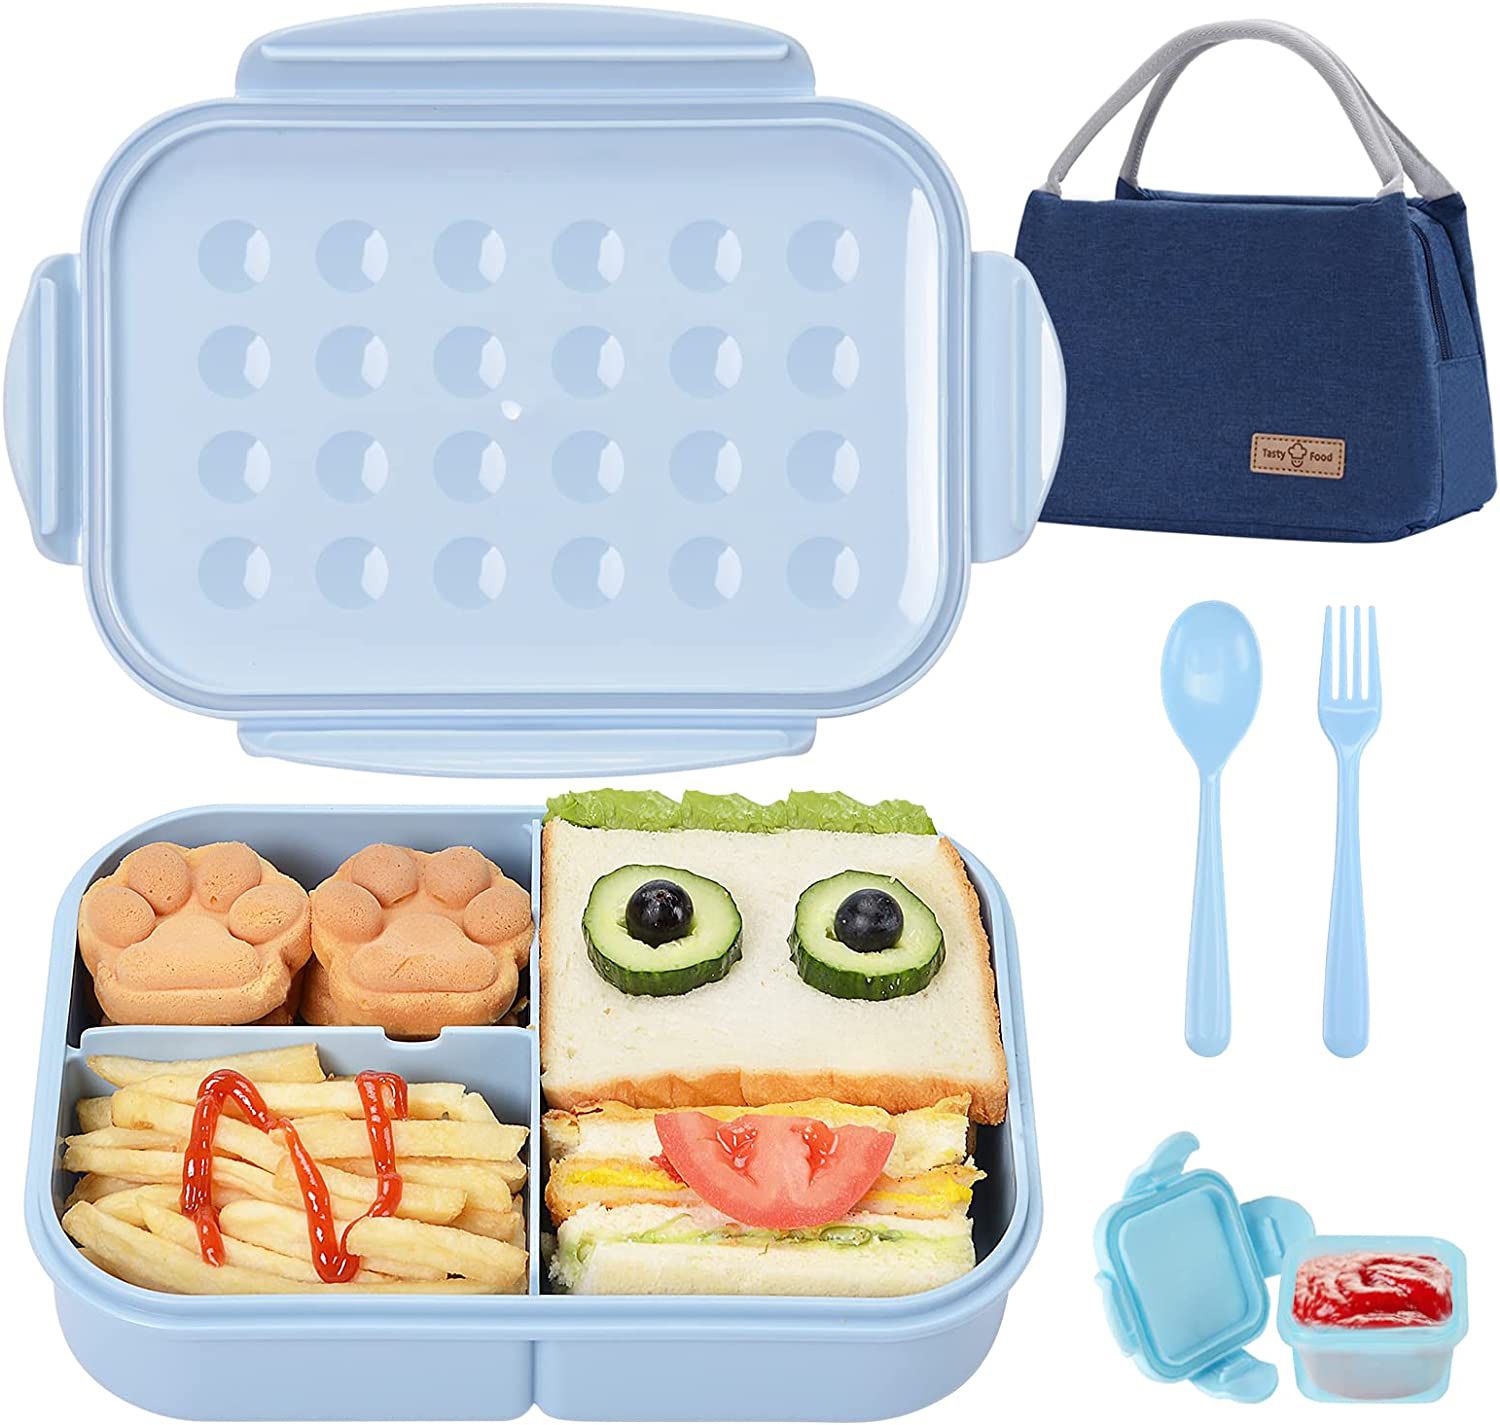 Bento Box Lunch Box Lunch Bags for Kids Men Women Adults,Lunch Bags for Work School Travel Picnic,Leak-proof Lunch Containers with Spoon Fork Knife, M